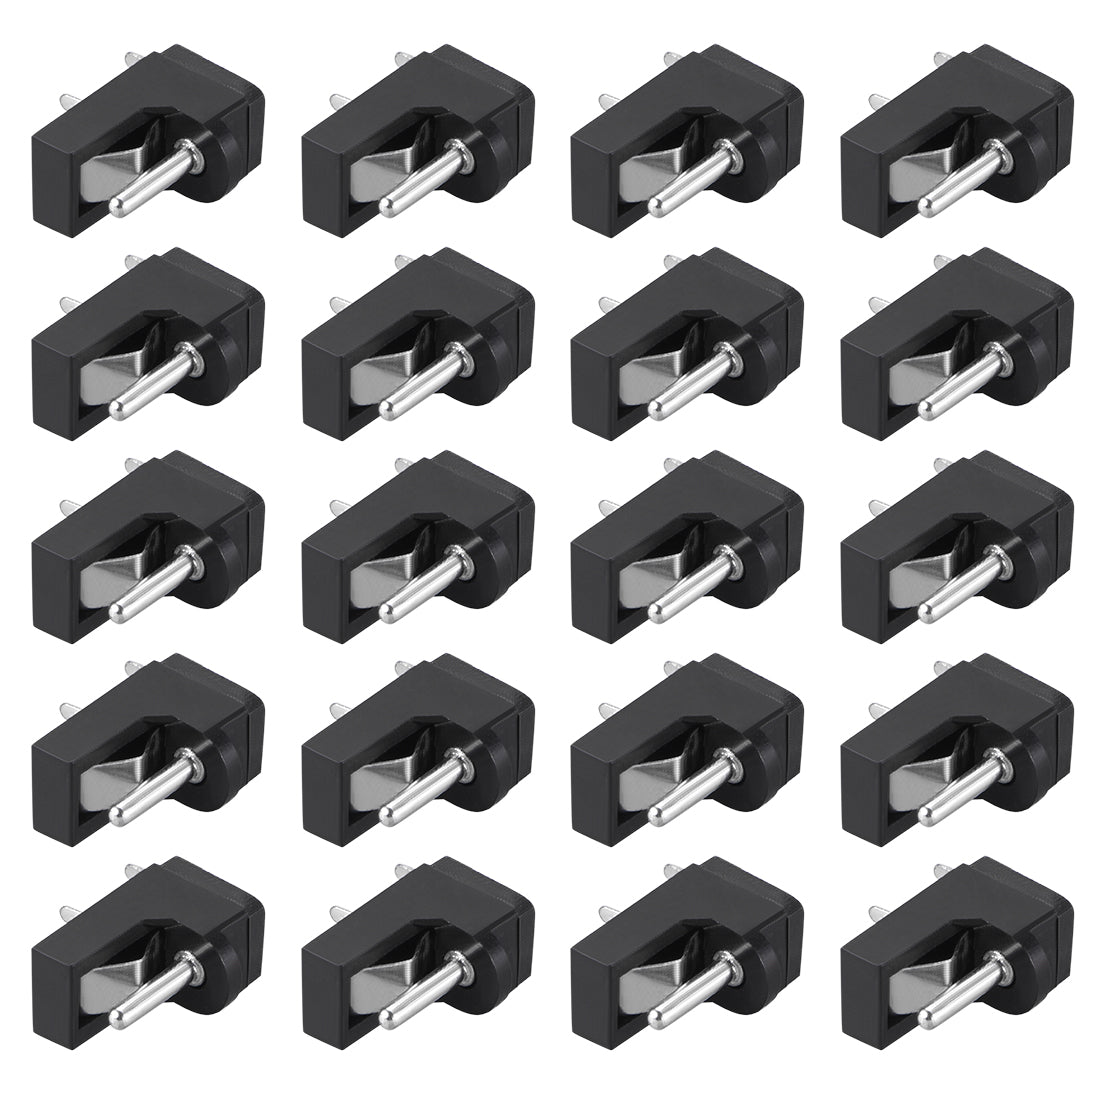 uxcell Uxcell PCB Mount 3.5mm x 1.3mm 3 Pin Audio Video DC Power Connector Socket DC001 Black 20Pcs